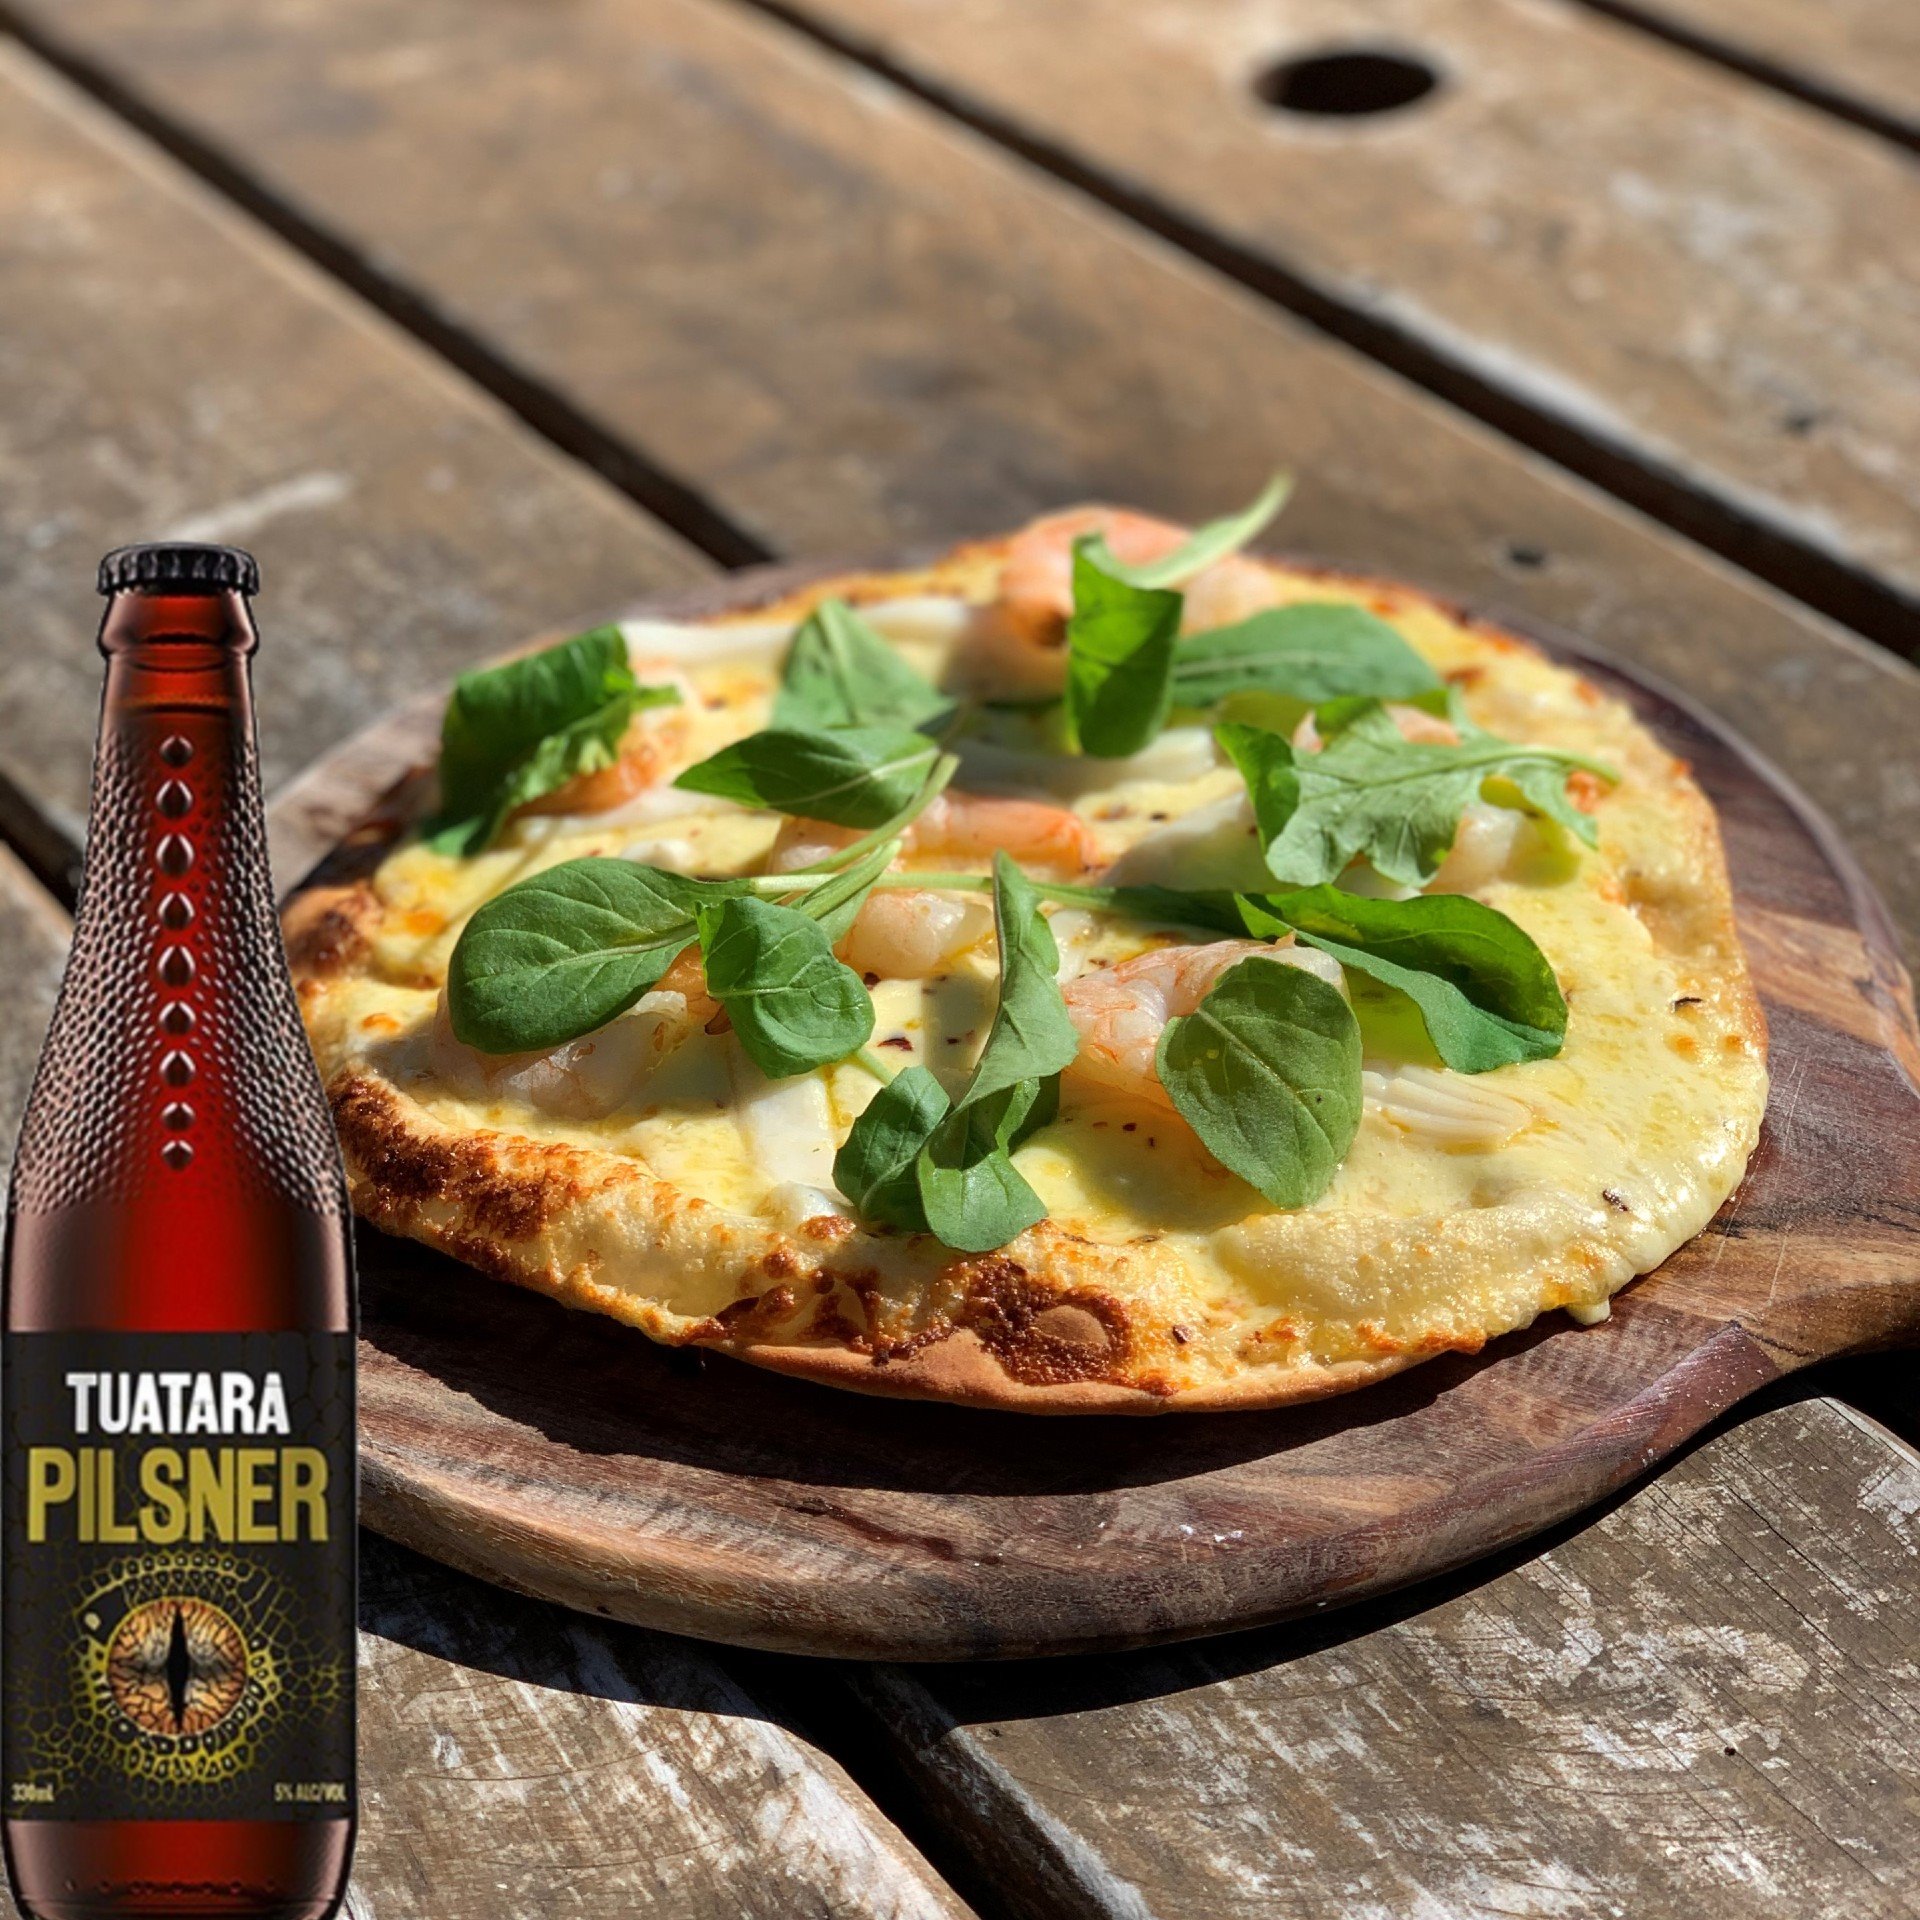 Pacific Pizza And Pilsner Image